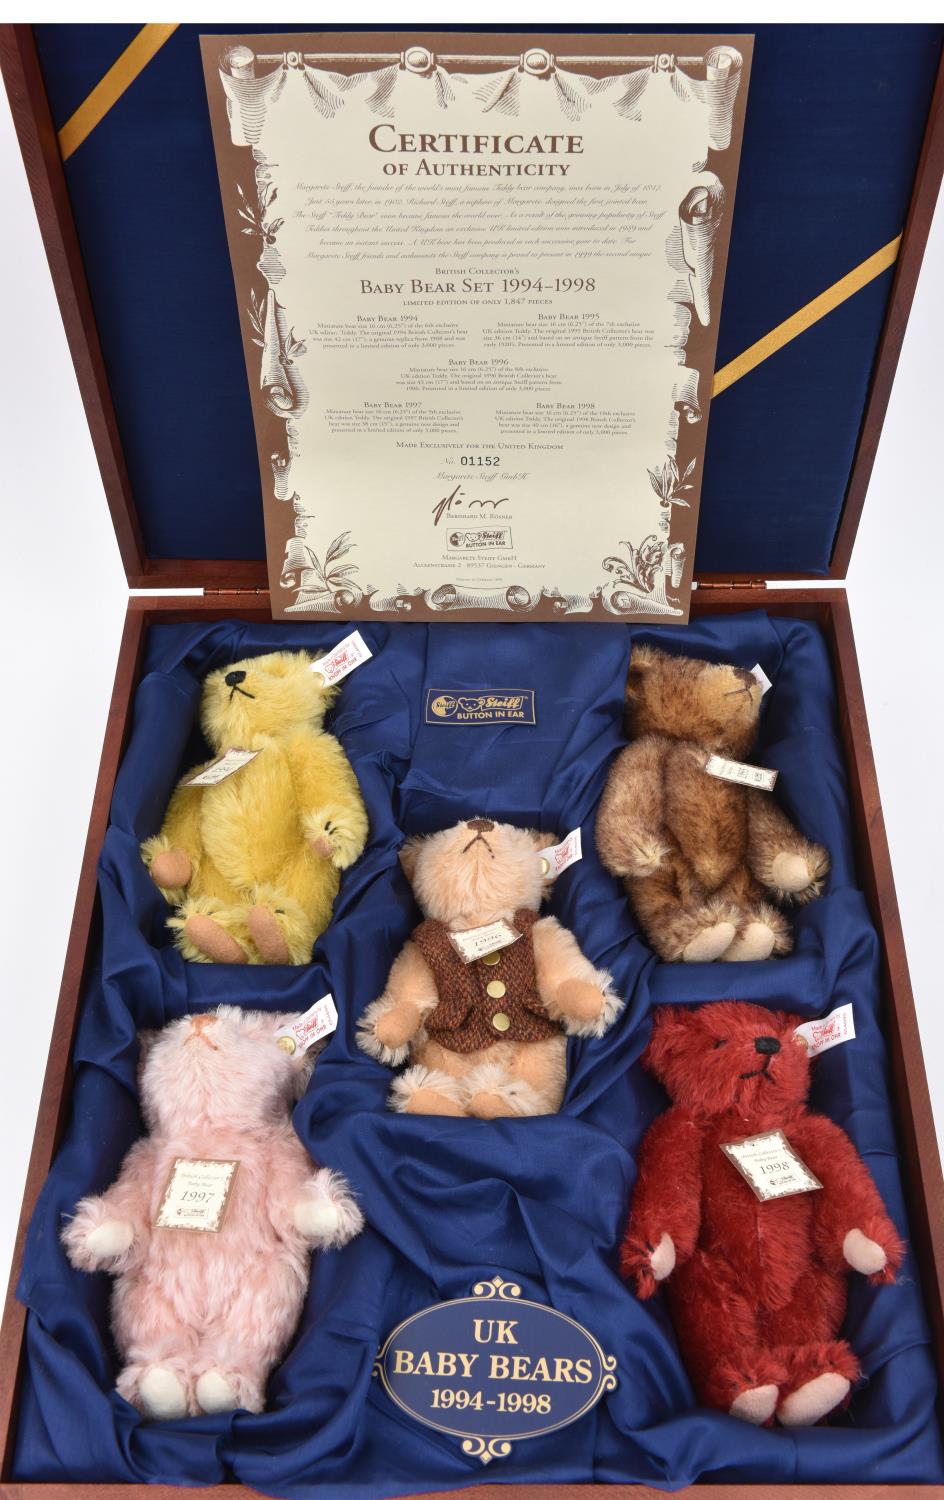 2 Steiff sets. A 1997 British Collector's wooden boxed set of 5 Steiff U.K. Baby Bears 1989-1993. - Image 2 of 2